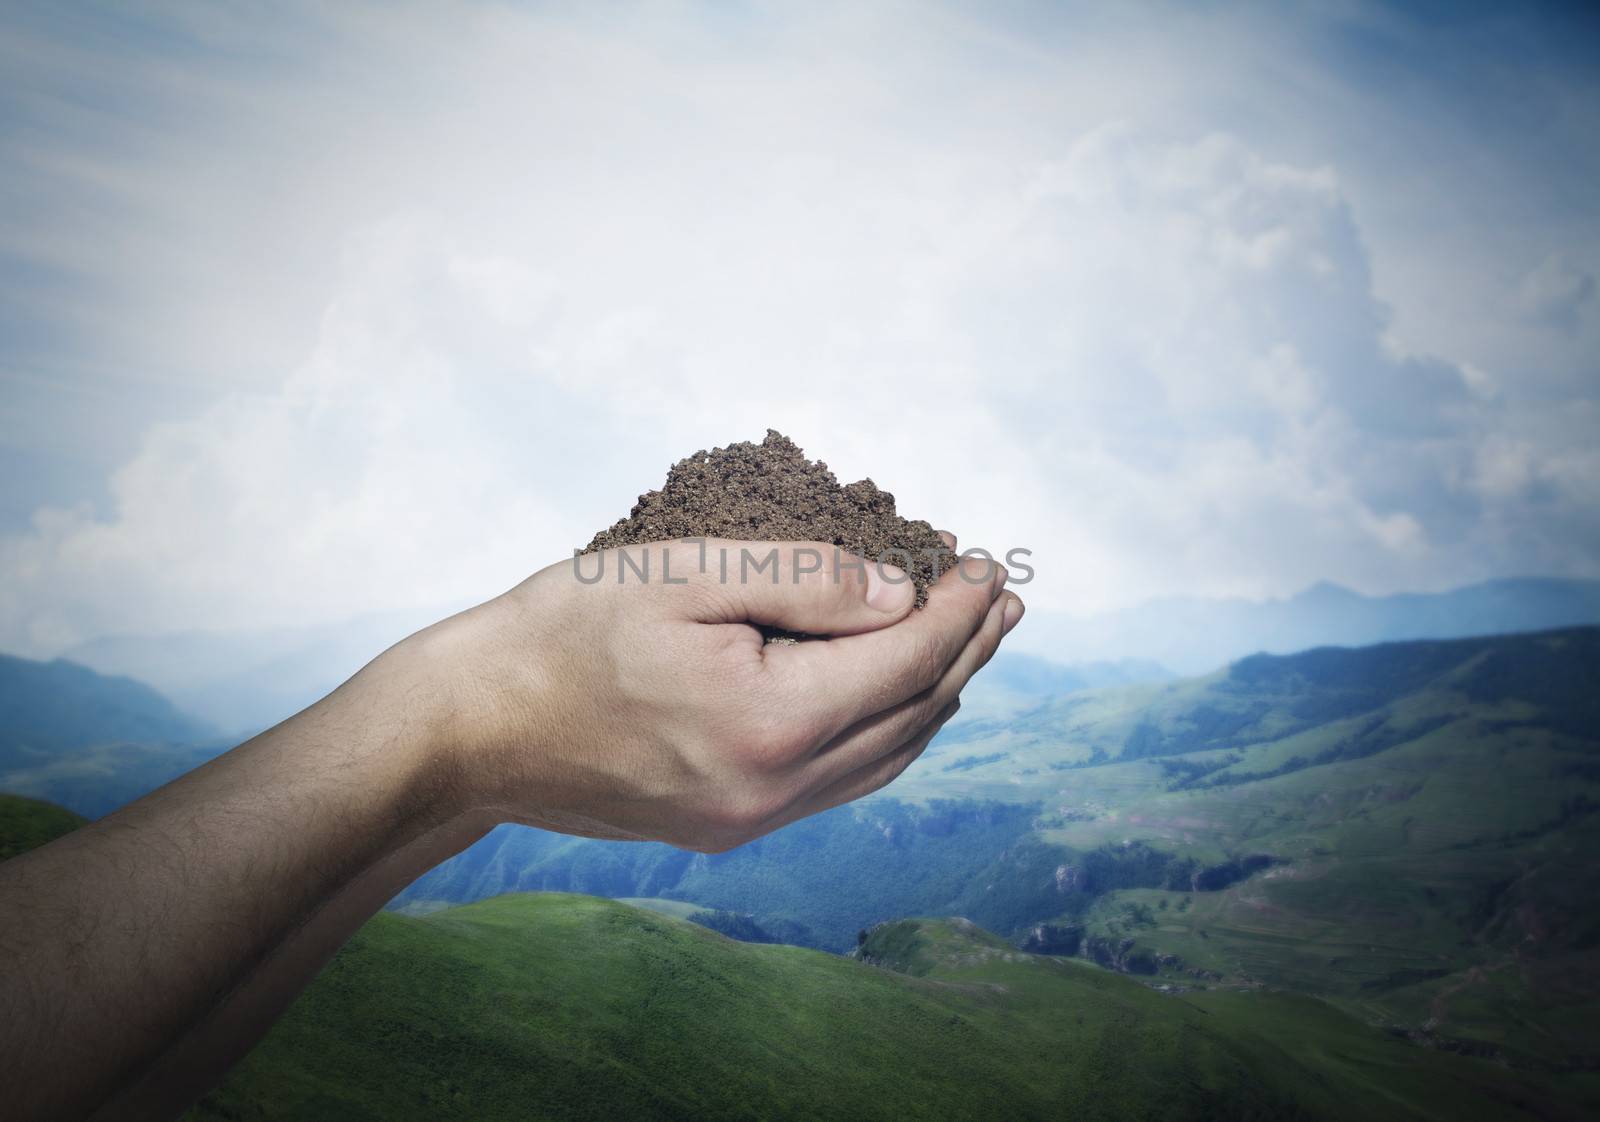 Hands holding a pile of soil with beautiful landscape in the background